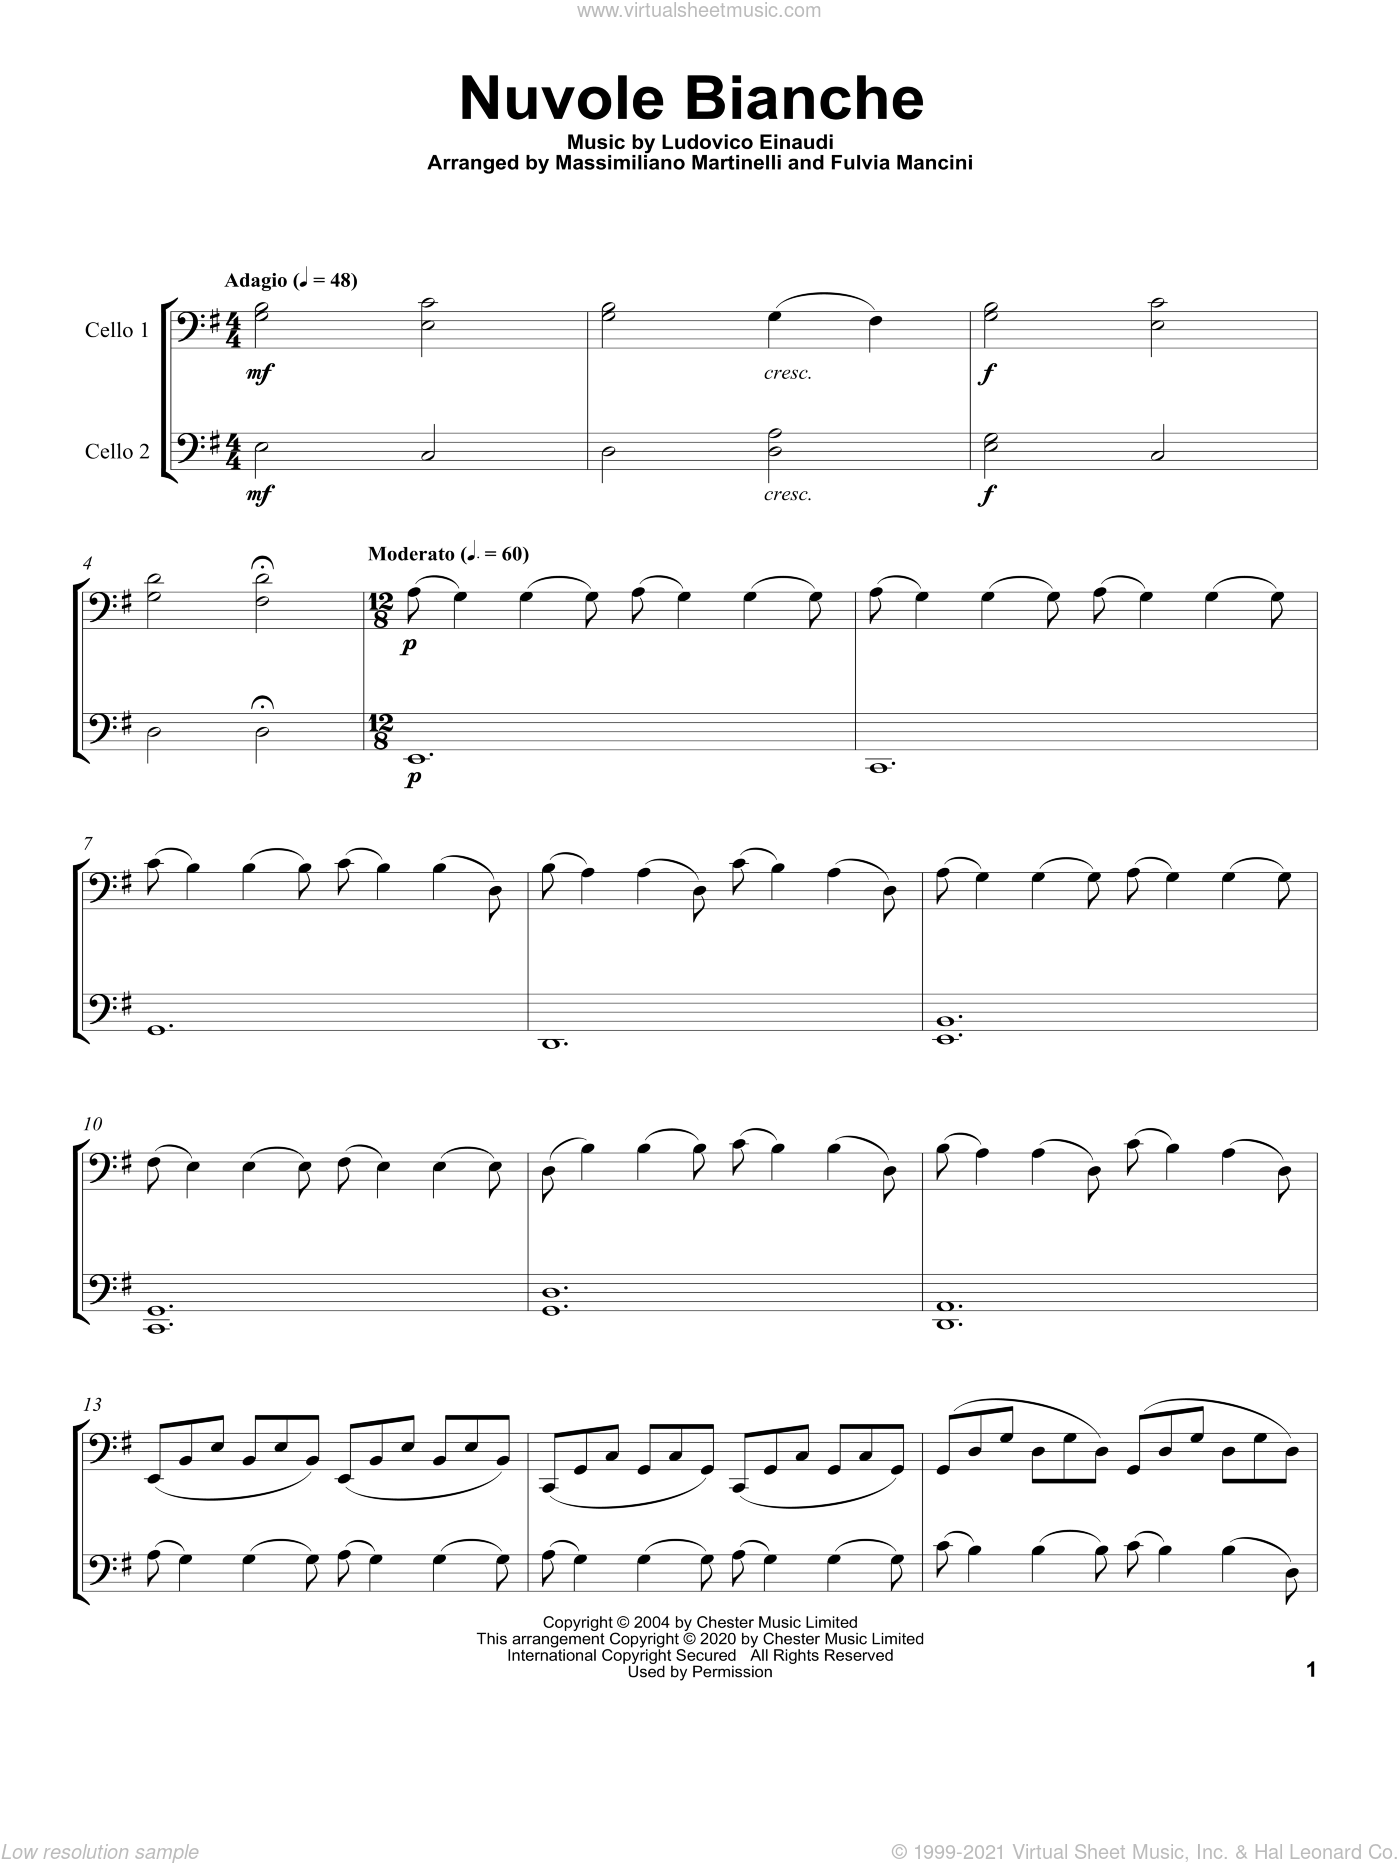 Cello Nuvole Bianche Sheet Music For Two Cellos Duet Duets Savesave nuvole bianche sheet music ludovico einaudi (sheet. cello nuvole bianche sheet music for two cellos duet duets